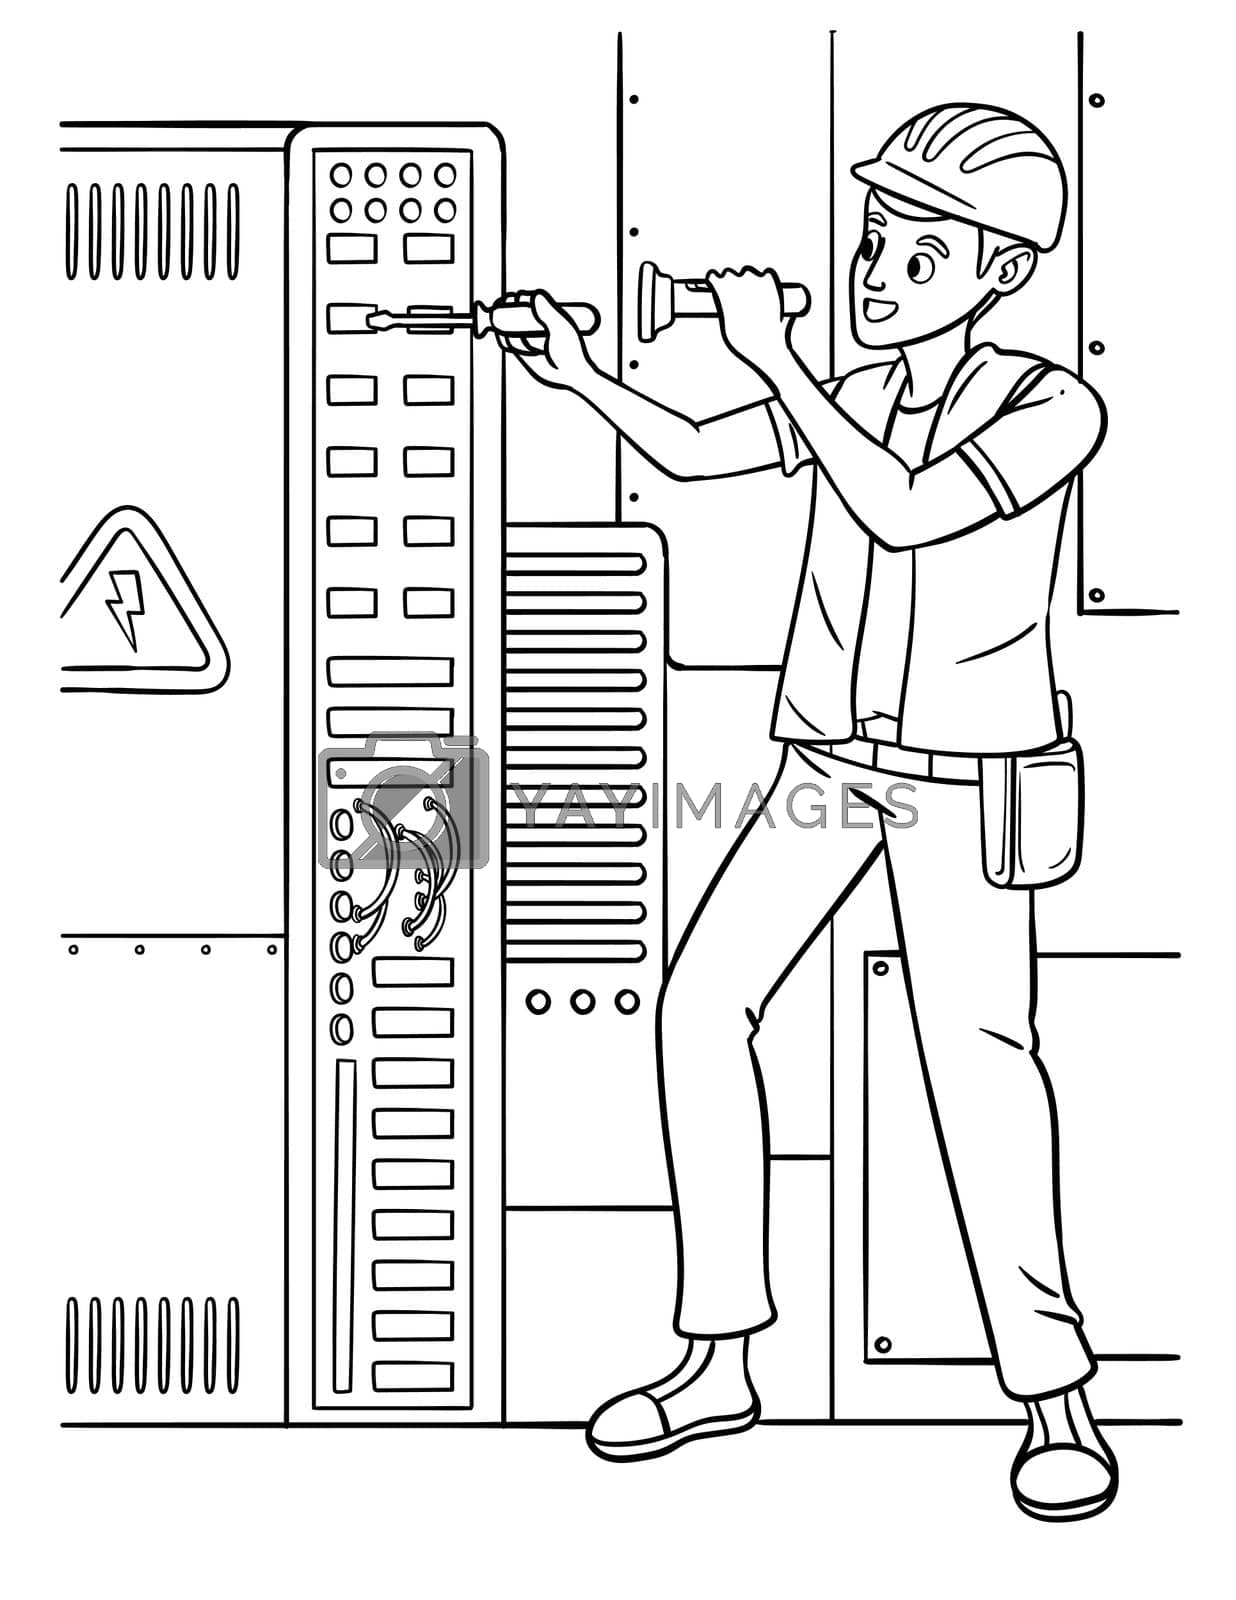 Royalty free image of Electrician Coloring Page for Kids by abbydesign